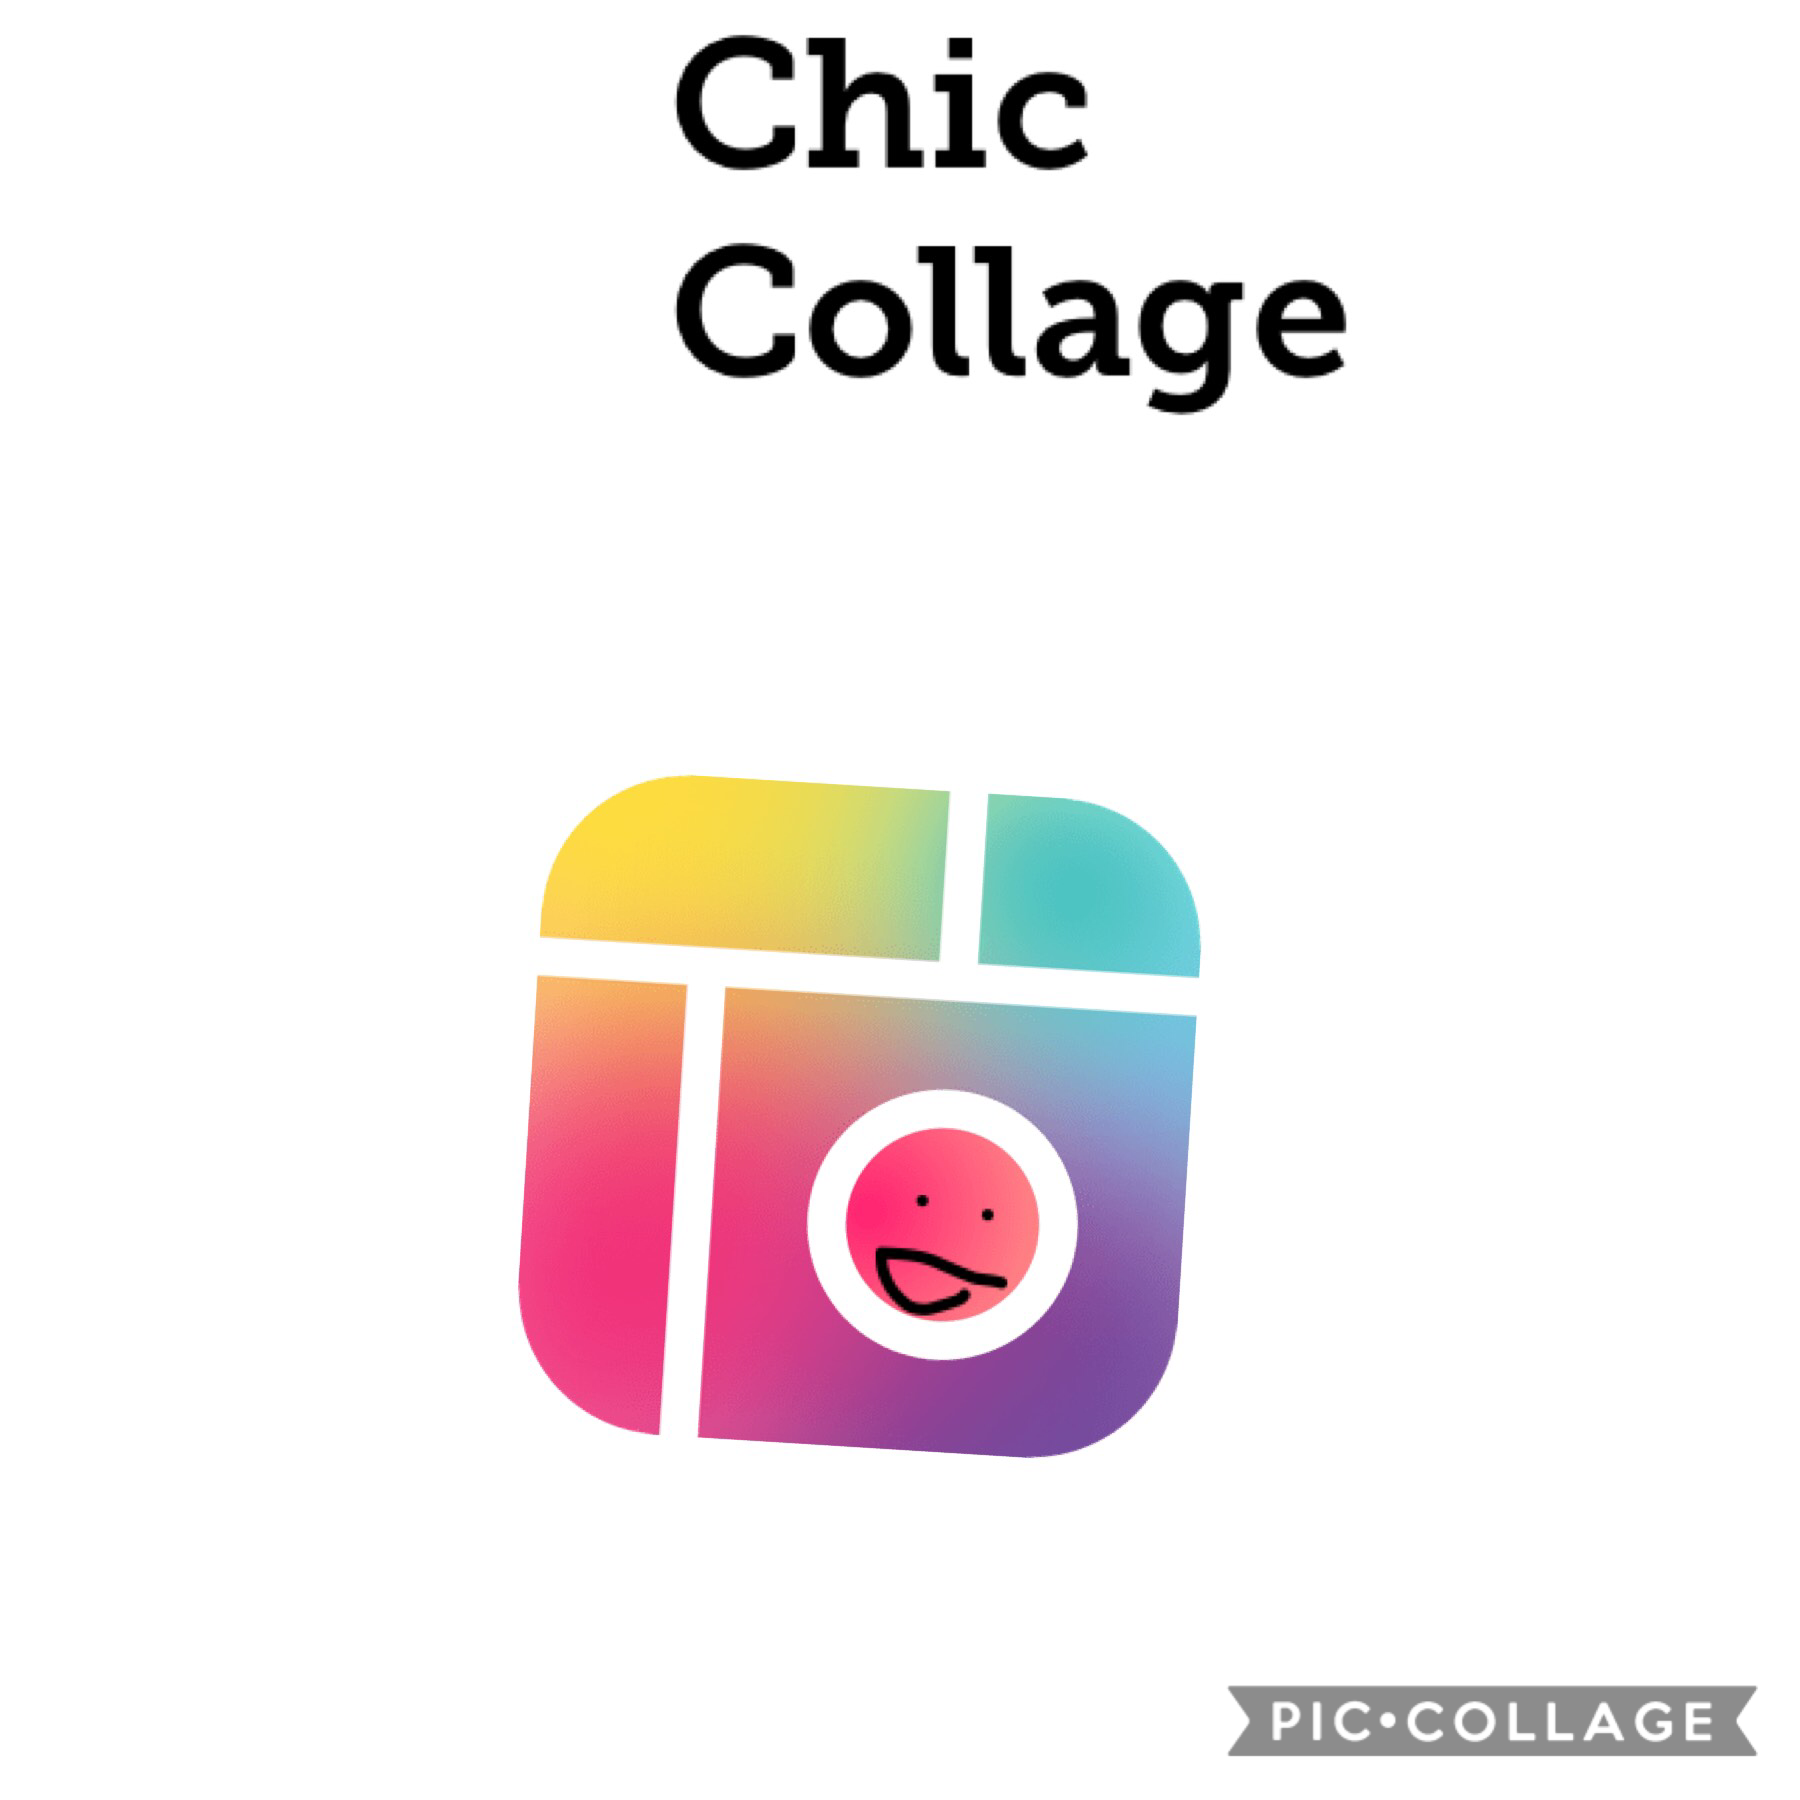 It’s the Pic Collage logo with a smilie face! (Its a meme)